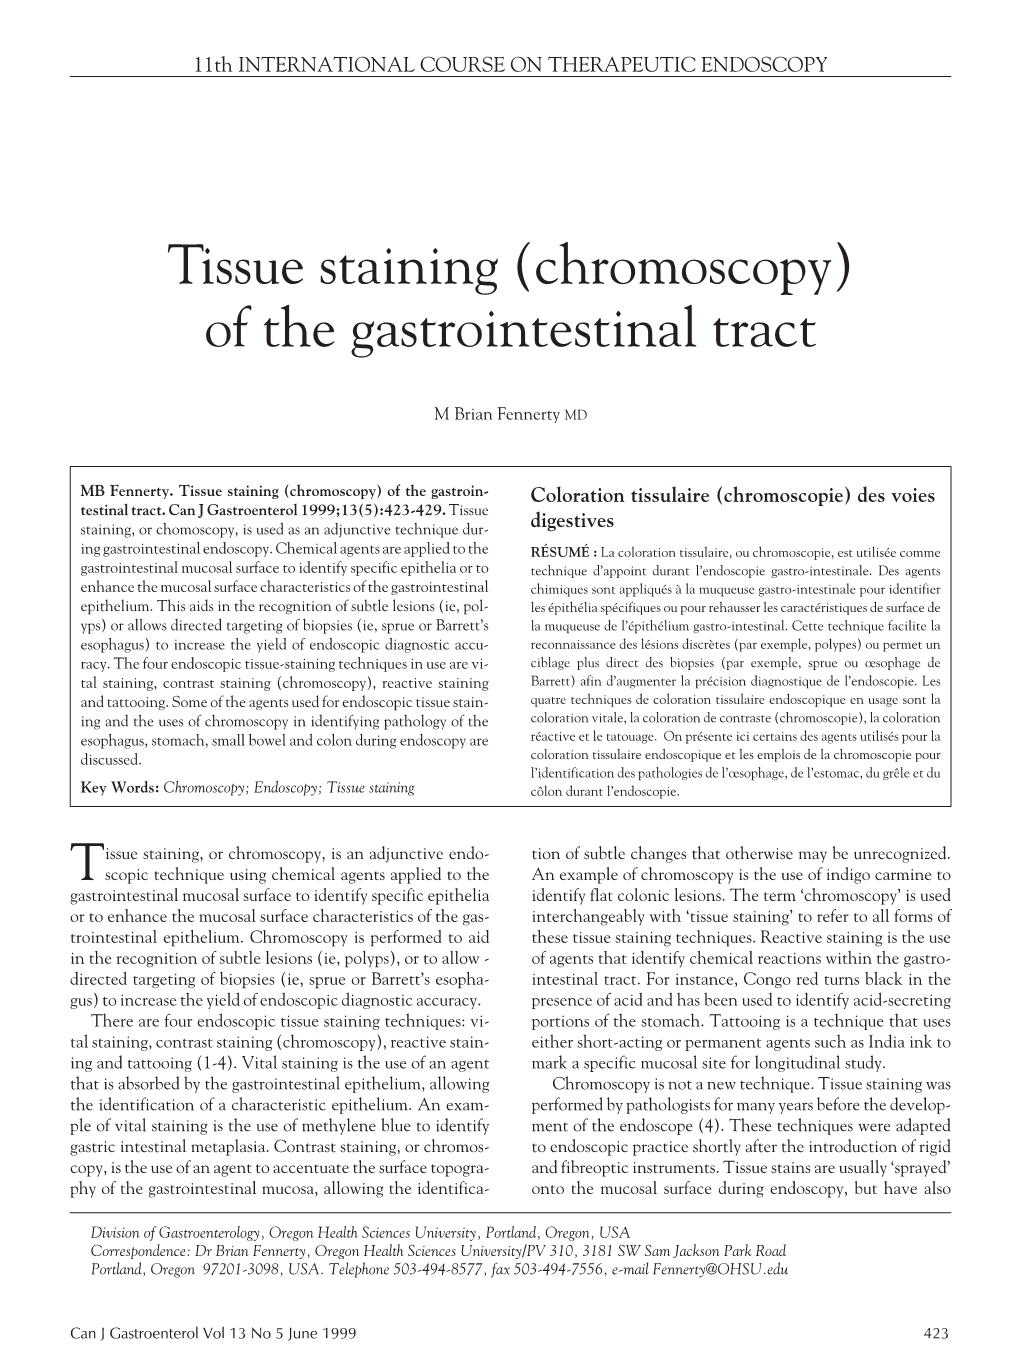 Of the Gastrointestinal Tract